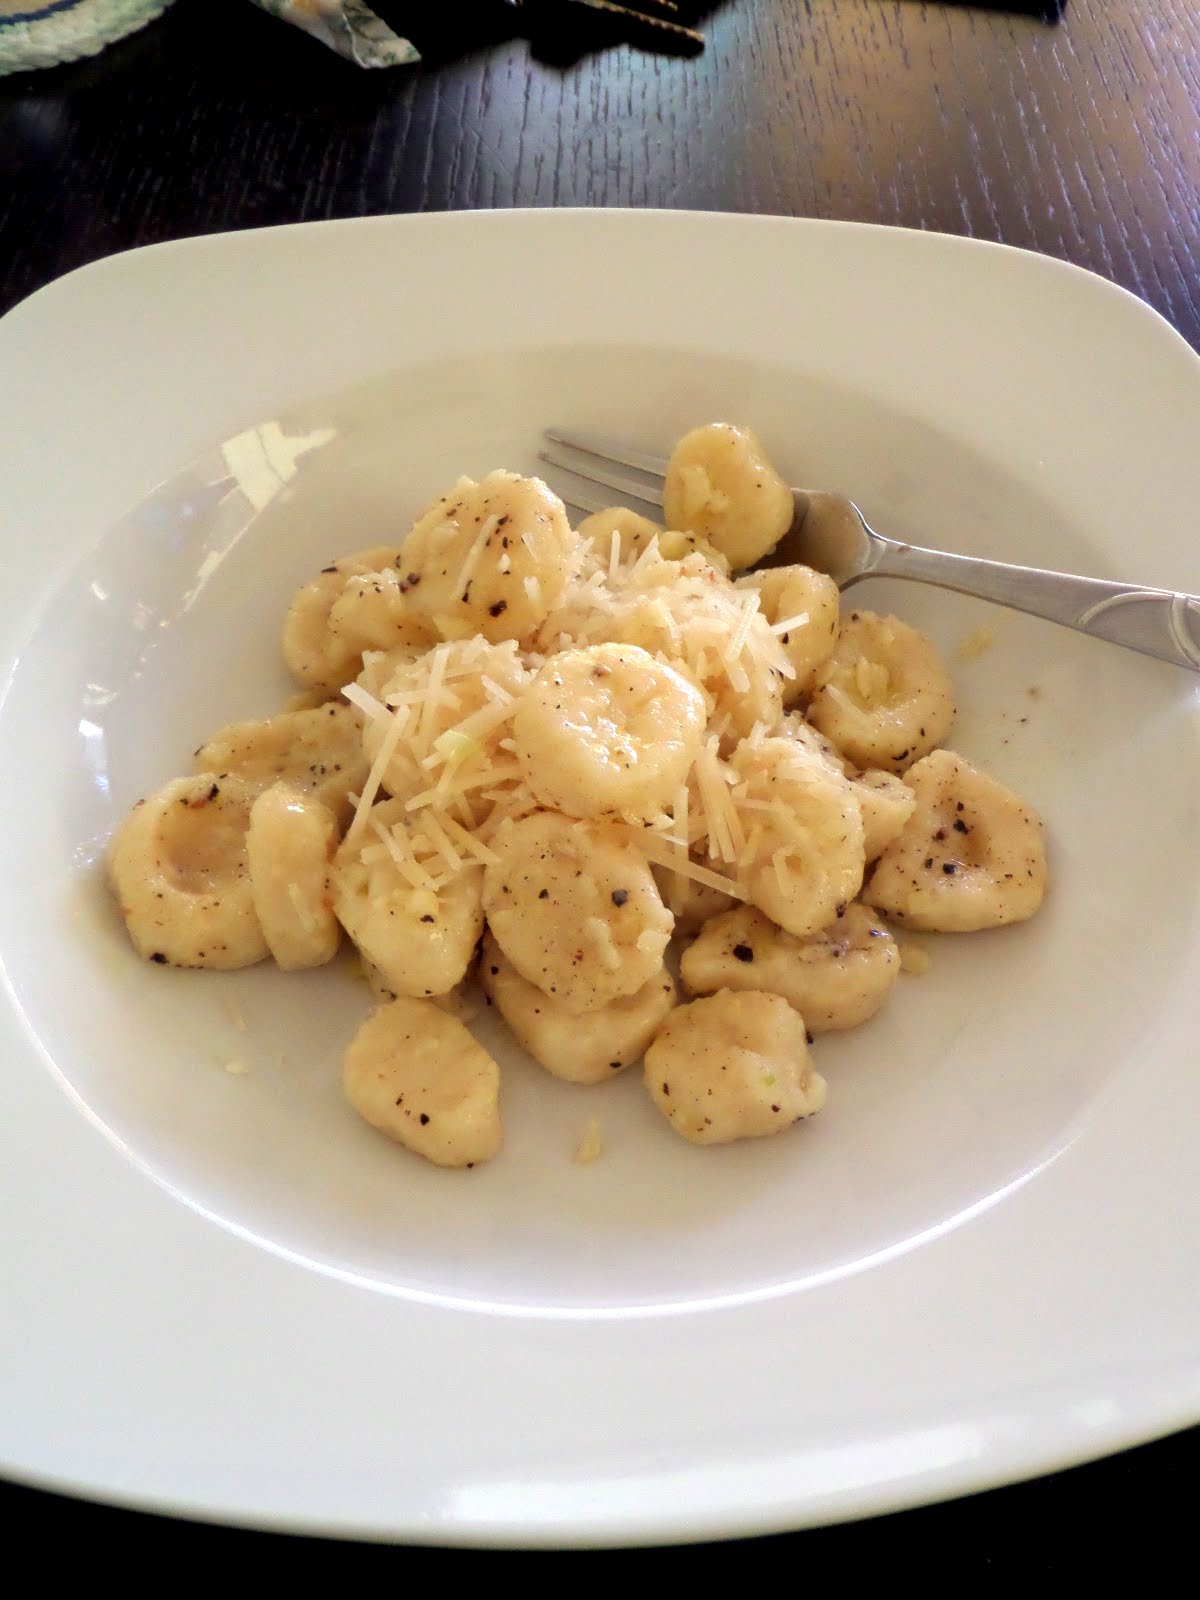 Garlic Butter Gnocchi:  Soft fluffy pillows of warm potato gnocchi tossed in a garlic butter sauce and topped with Parmesan cheese.